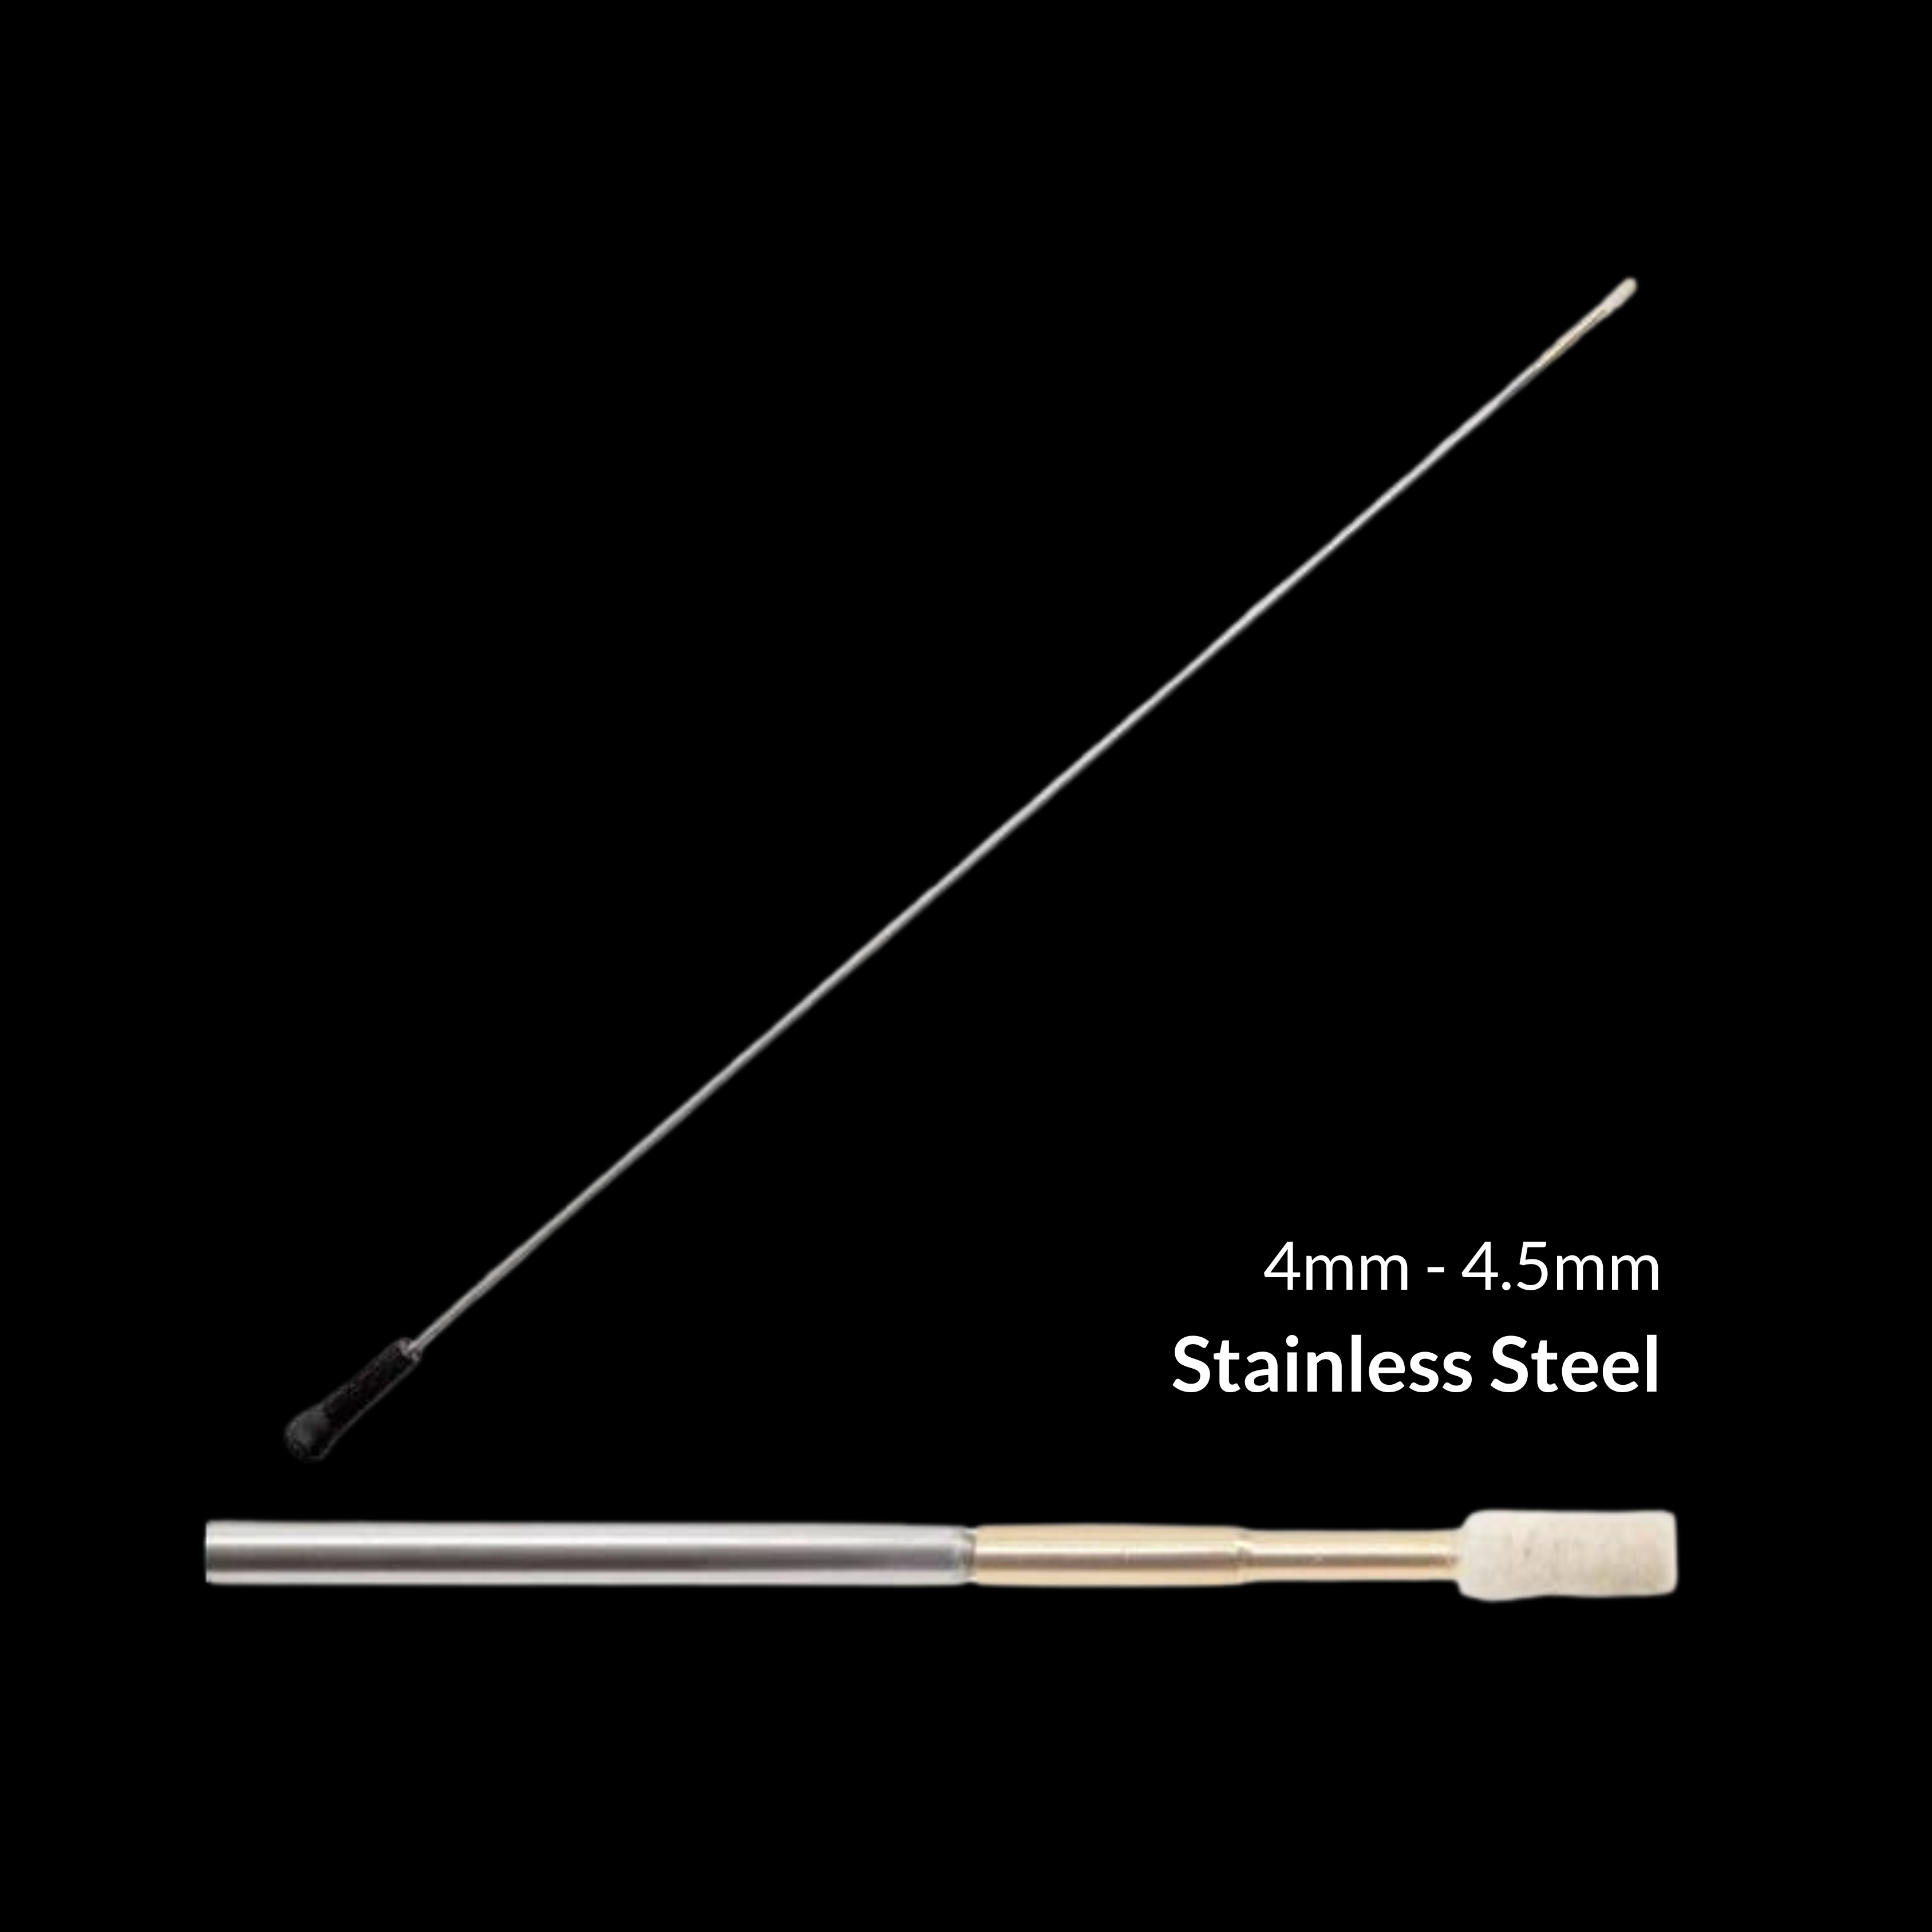 Pro Clean VFG CLEANING ROD (RIFLE) - 4mm - 4.5mm Stainless Steel